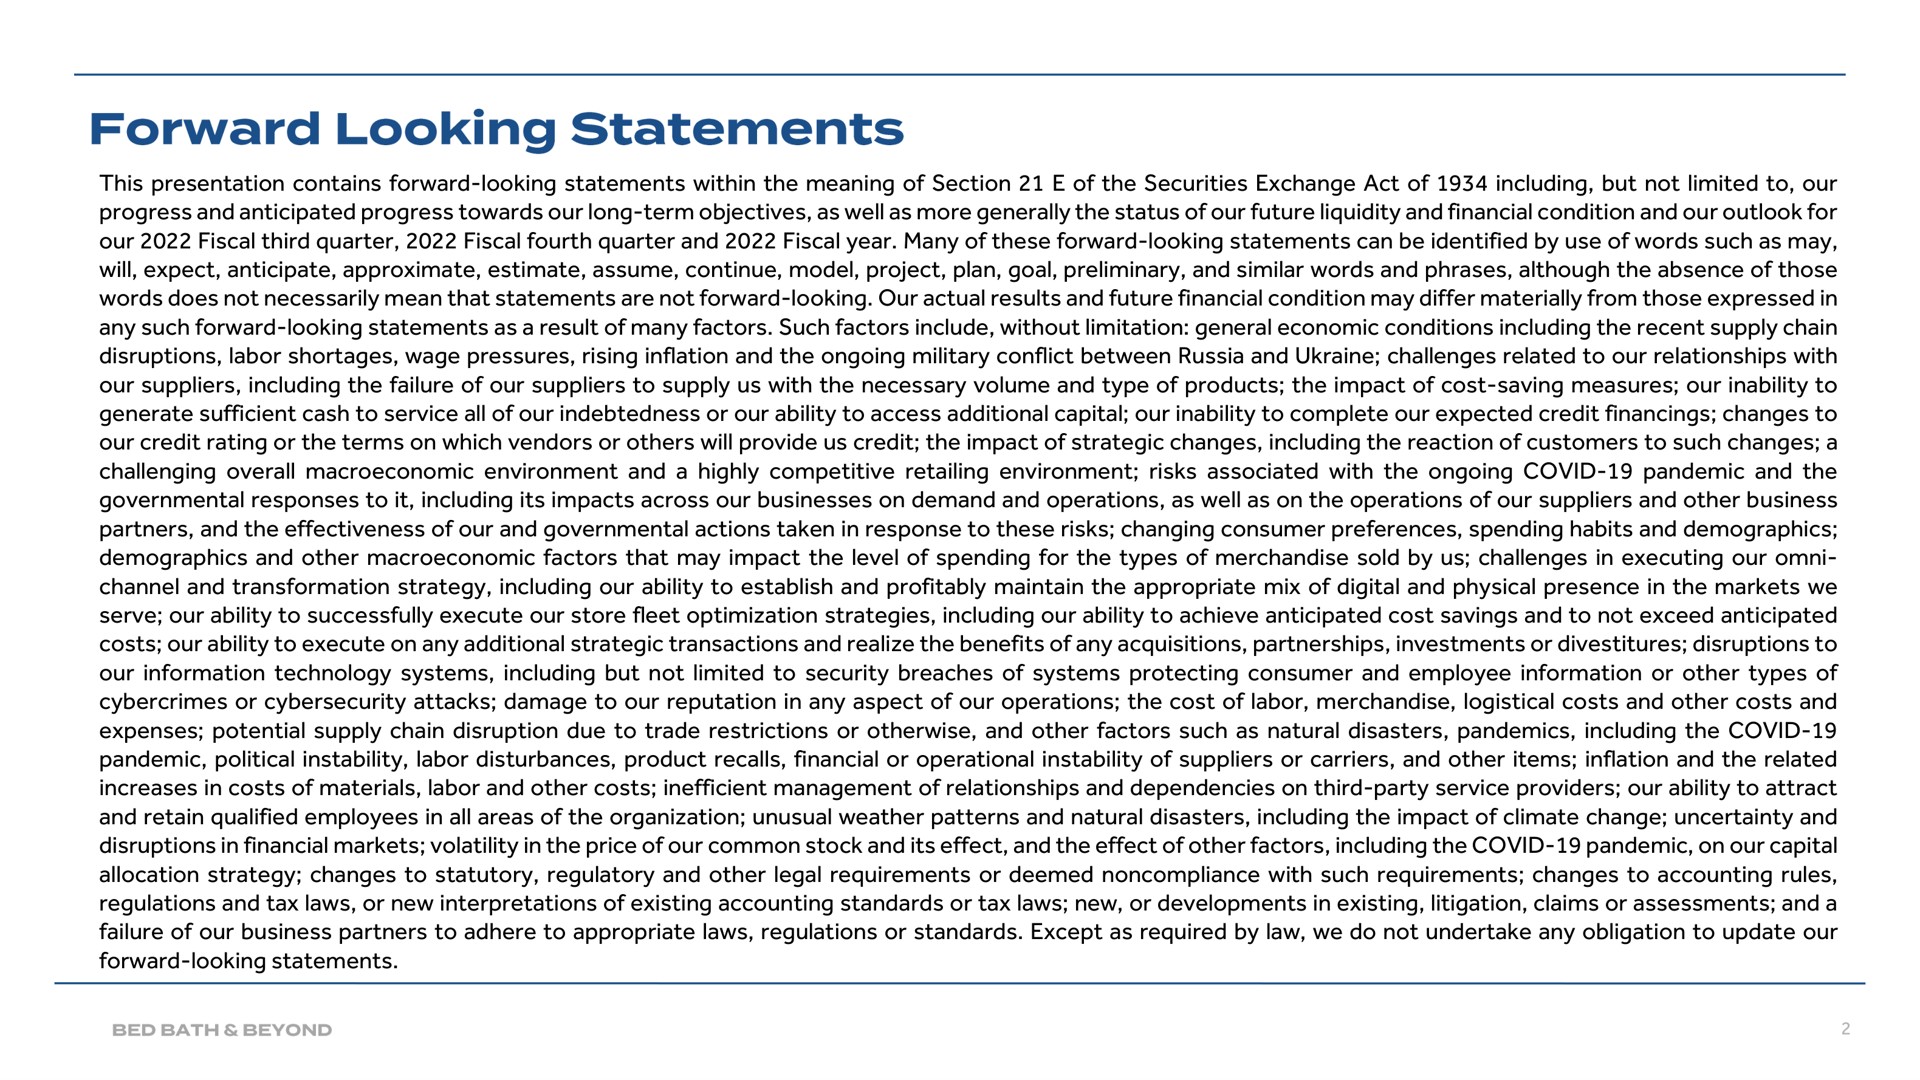 this presentation contains forward looking statements within the meaning of section of the securities exchange act of including but not limited to our progress and anticipated progress towards our long term objectives as well as more generally the status of our future liquidity and financial condition and our outlook for our fiscal third quarter fiscal fourth quarter and fiscal year many of these forward looking statements can be identified by use of words such as may will expect anticipate approximate estimate assume continue model project plan goal preliminary and similar words and phrases although the absence of those words does not necessarily mean that statements are not forward looking our actual results and future financial condition may differ materially from those expressed in any such forward looking statements as a result of many factors such factors include without limitation general economic conditions including the recent supply chain disruptions labor shortages wage pressures rising inflation and the ongoing military conflict between russia and challenges related to our relationships with our suppliers including the failure of our suppliers to supply us with the necessary volume and type of products the impact of cost saving measures our inability to generate sufficient cash to service all of our indebtedness or our ability to access additional capital our inability to complete our expected credit financings changes to our credit rating or the terms on which vendors or will provide us credit the impact of strategic changes including the reaction of customers to such changes a challenging overall environment and a highly competitive retailing environment risks associated with the ongoing covid pandemic and the governmental responses to it including its impacts across our businesses on demand and operations as well as on the operations of our suppliers and other business partners and the effectiveness of our and governmental actions taken in response to these risks changing consumer preferences spending habits and demographics demographics and other factors that may impact the level of spending for the types of merchandise sold by us challenges in executing our channel and transformation strategy including our ability to establish and profitably maintain the appropriate mix of digital and physical presence in the markets we serve our ability to successfully execute our store fleet optimization strategies including our ability to achieve anticipated cost savings and to not exceed anticipated costs our ability to execute on any additional strategic transactions and realize the benefits of any acquisitions partnerships investments or divestitures disruptions to our information technology systems including but not limited to security breaches of systems protecting consumer and employee information or other types of or attacks damage to our reputation in any aspect of our operations the cost of labor merchandise logistical costs and other costs and expenses potential supply chain disruption due to trade restrictions or otherwise and other factors such as natural disasters pandemics including the covid pandemic political instability labor disturbances product recalls financial or operational instability of suppliers or carriers and other items inflation and the related increases in costs of materials labor and other costs inefficient management of relationships and dependencies on third party service providers our ability to attract and retain qualified employees in all areas of the organization unusual weather patterns and natural disasters including the impact of climate change uncertainty and disruptions in financial markets volatility in the price of our common stock and its effect and the effect of other factors including the covid pandemic on our capital allocation strategy changes to statutory regulatory and other legal requirements or deemed noncompliance with such requirements changes to accounting rules regulations and tax laws or new interpretations of existing accounting standards or tax laws new or developments in existing litigation claims or assessments and a failure of our business partners to adhere to appropriate laws regulations or standards except as required by law we do not undertake any obligation to update our forward looking statements forward looking | Bed Bath & Beyond